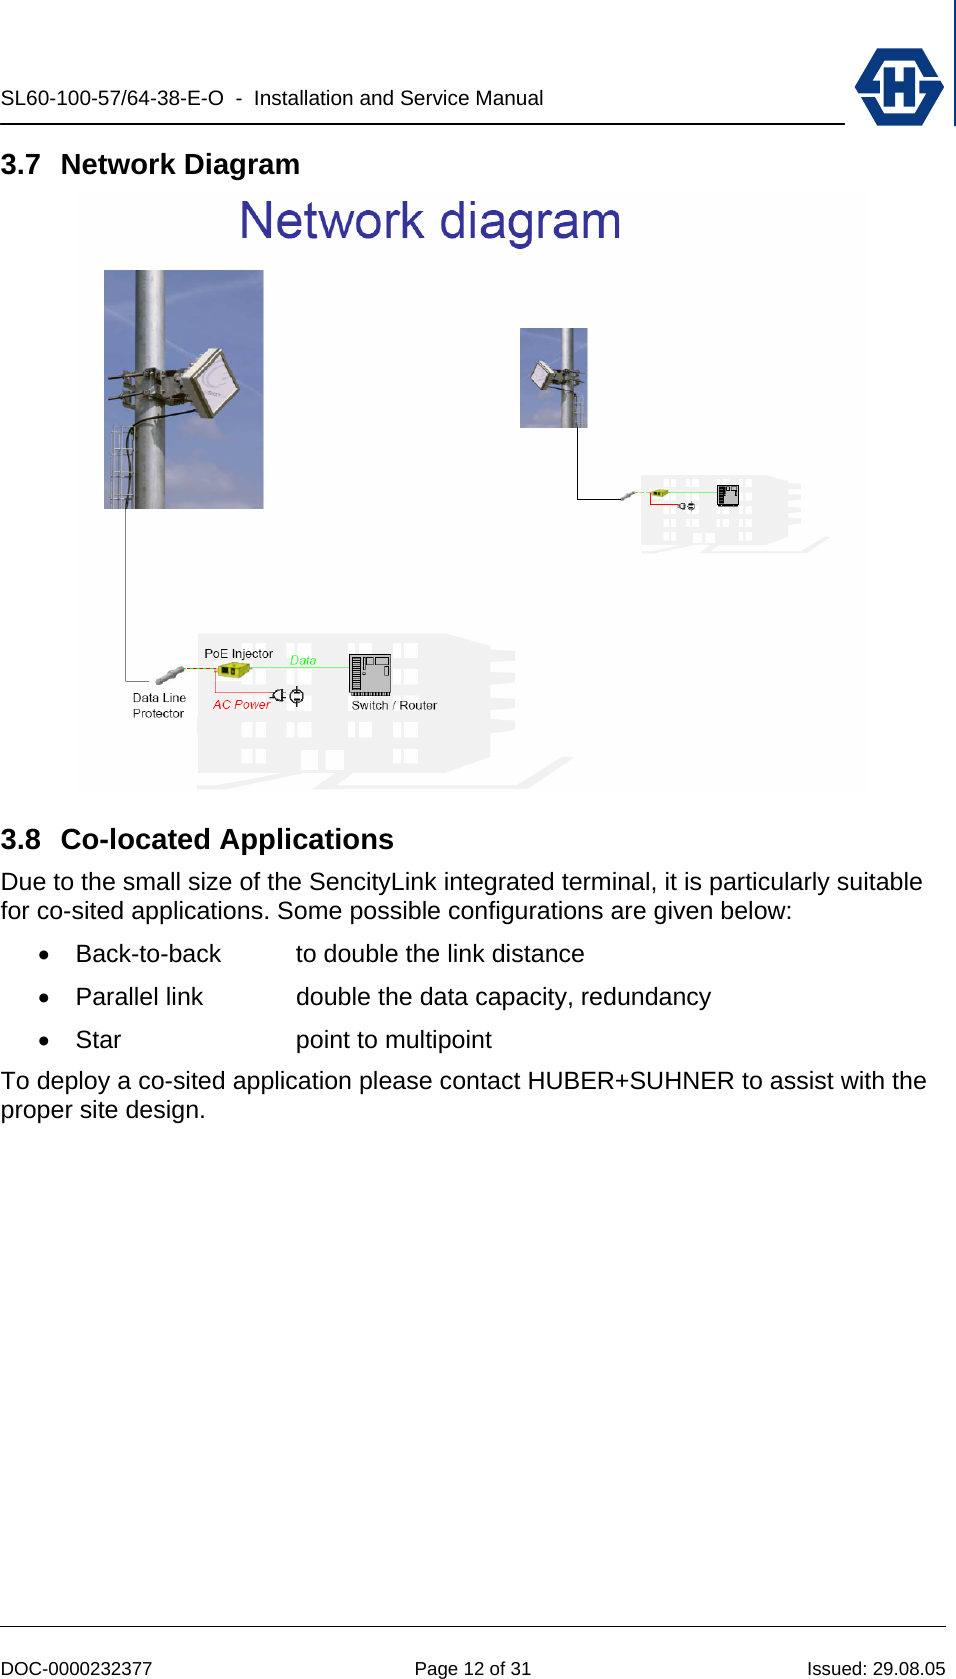 SL60-100-57/64-38-E-O  -  Installation and Service Manual   DOC-0000232377  Page 12 of 31  Issued: 29.08.05 3.7 Network Diagram  3.8 Co-located Applications Due to the small size of the SencityLink integrated terminal, it is particularly suitable for co-sited applications. Some possible configurations are given below: •  Back-to-back  to double the link distance •  Parallel link  double the data capacity, redundancy •  Star  point to multipoint To deploy a co-sited application please contact HUBER+SUHNER to assist with the proper site design. 